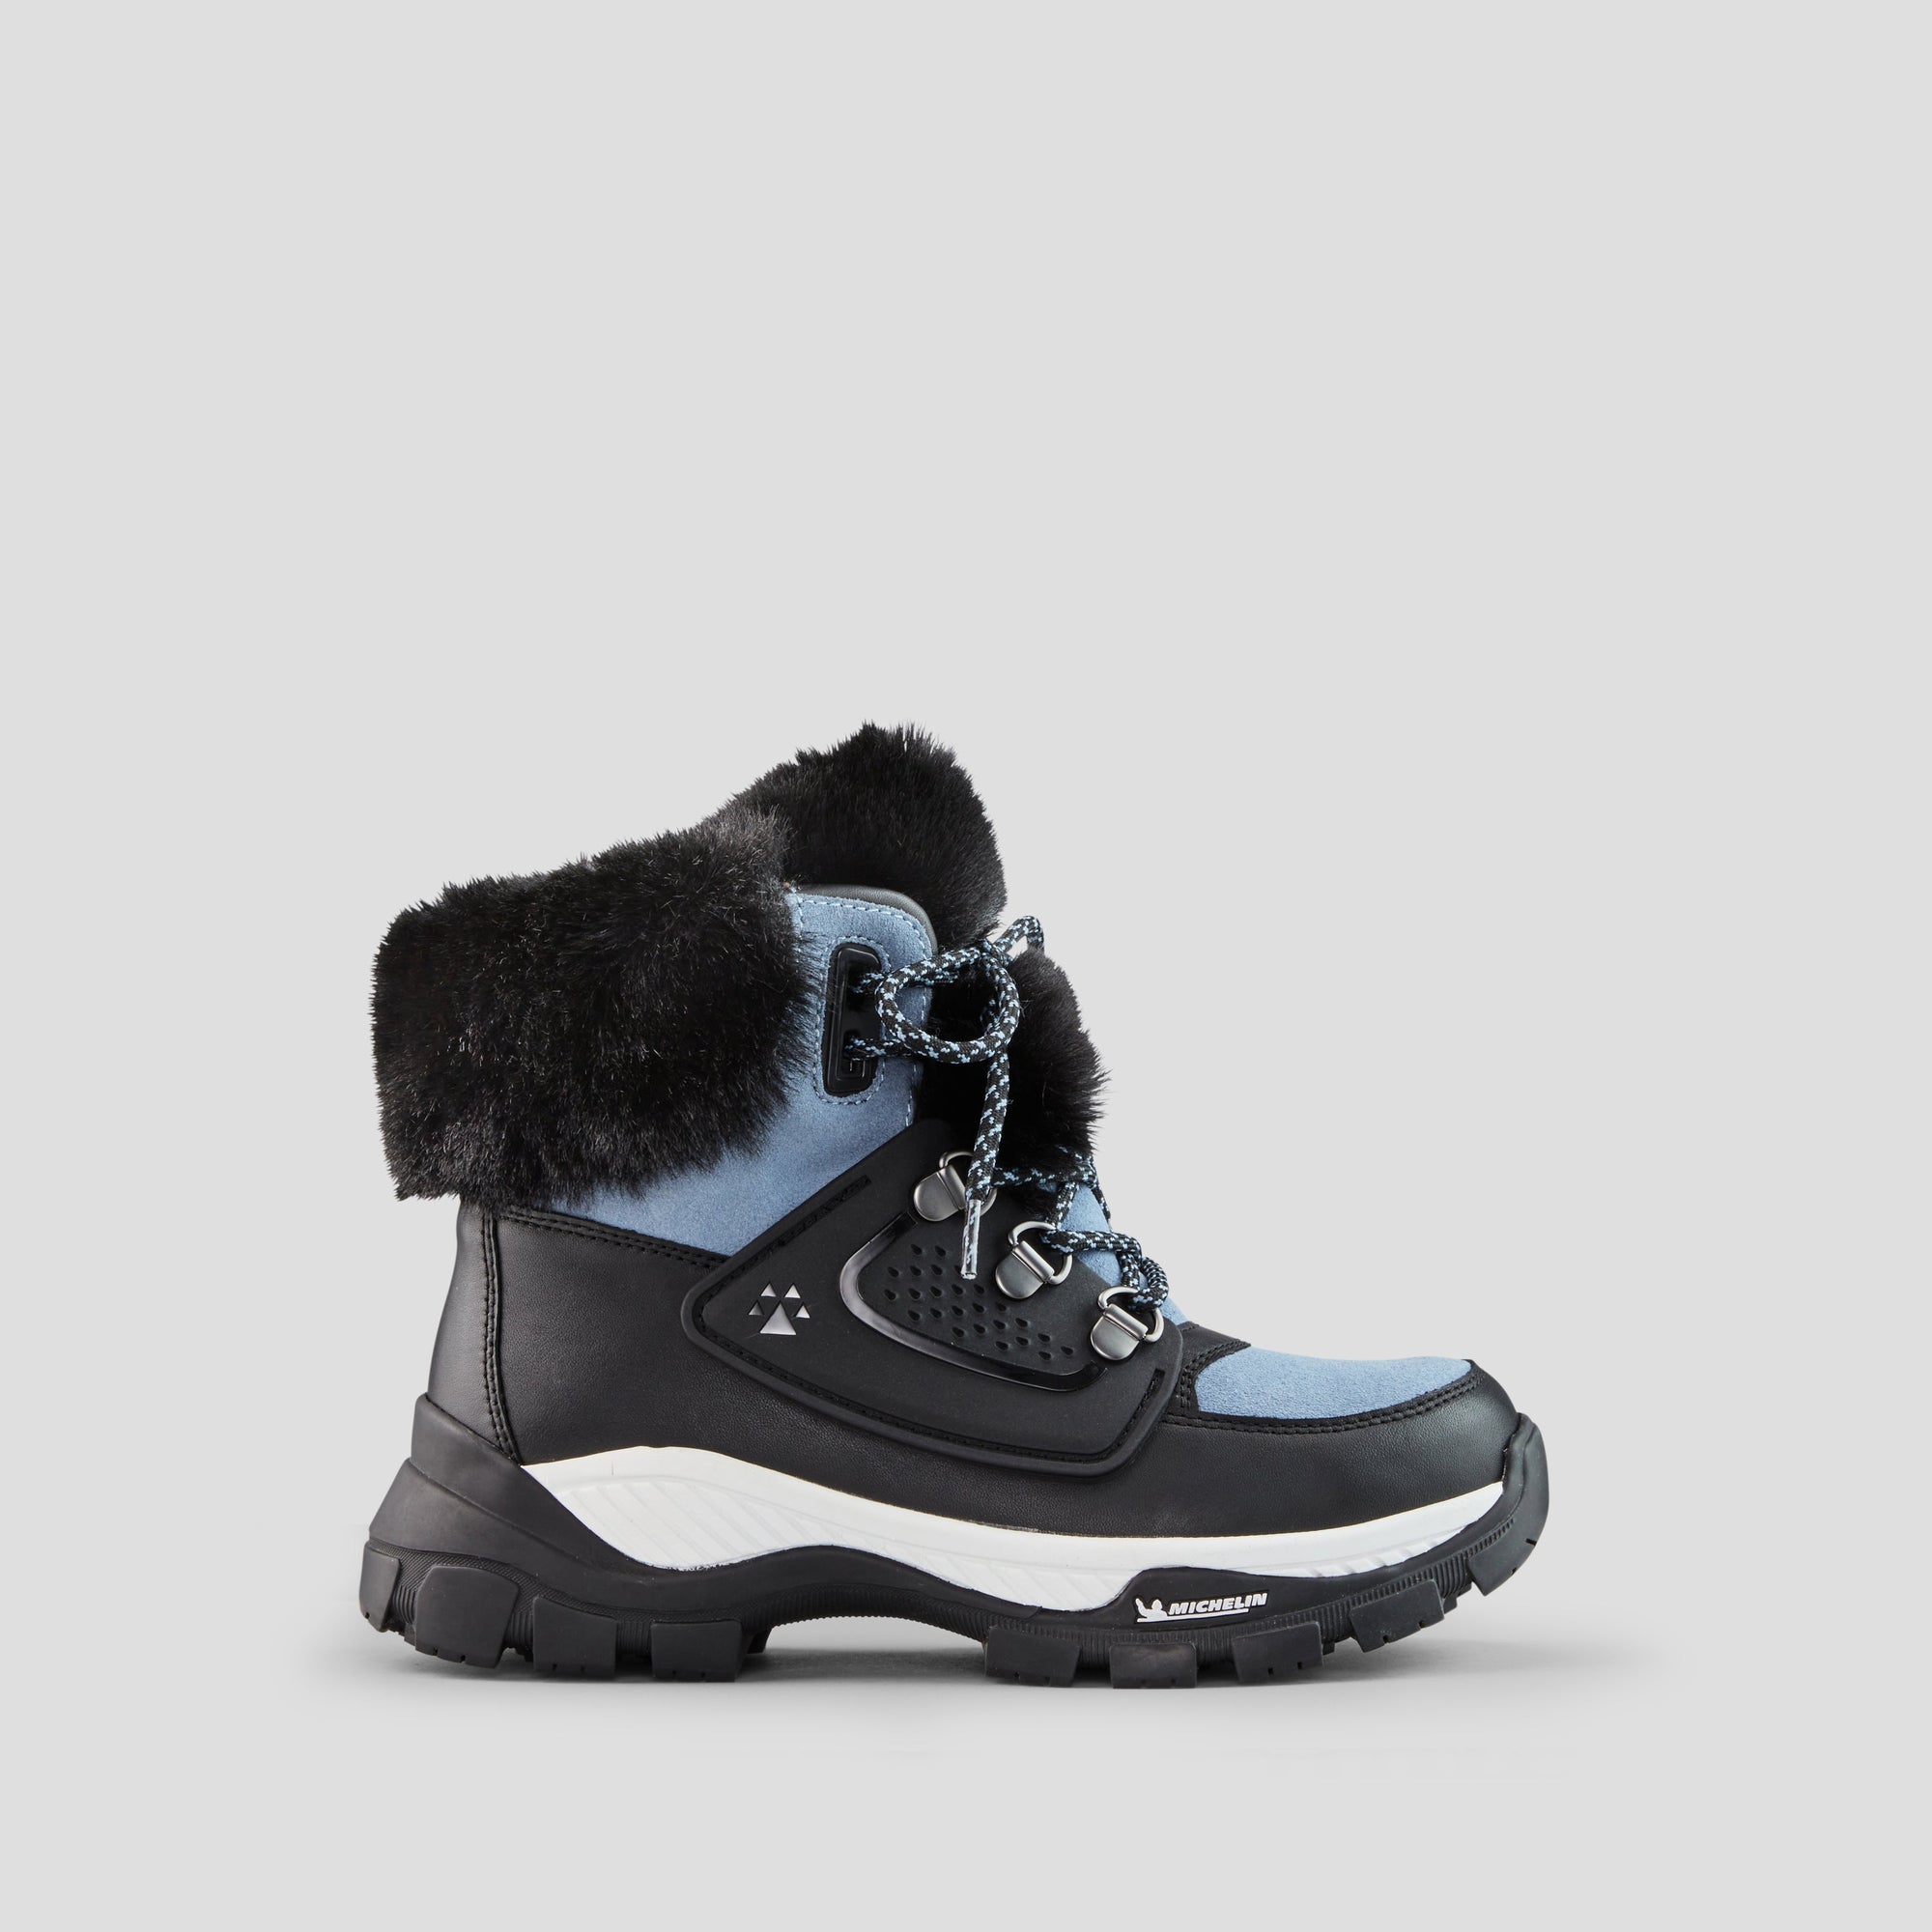 Union Leather and Suede Waterproof Winter Boot with PrimaLoft® and soles by Michelin - Color Denim